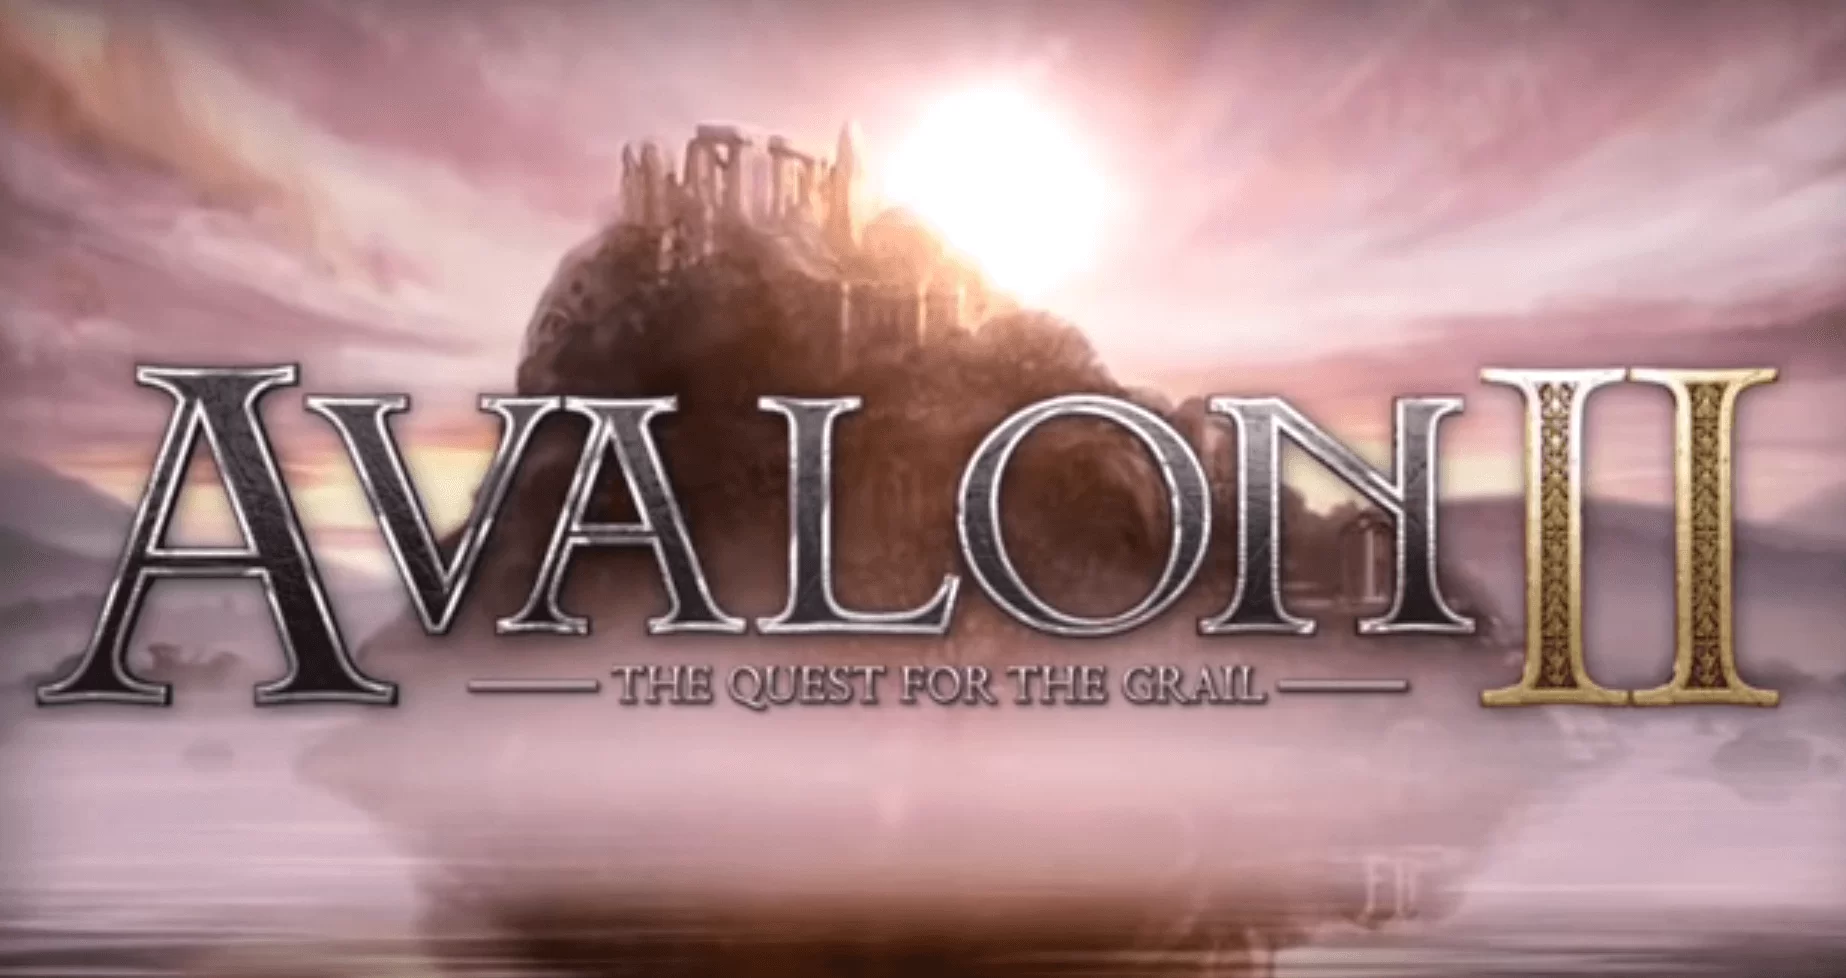 Avalon Ii - Quest For The Grail slot